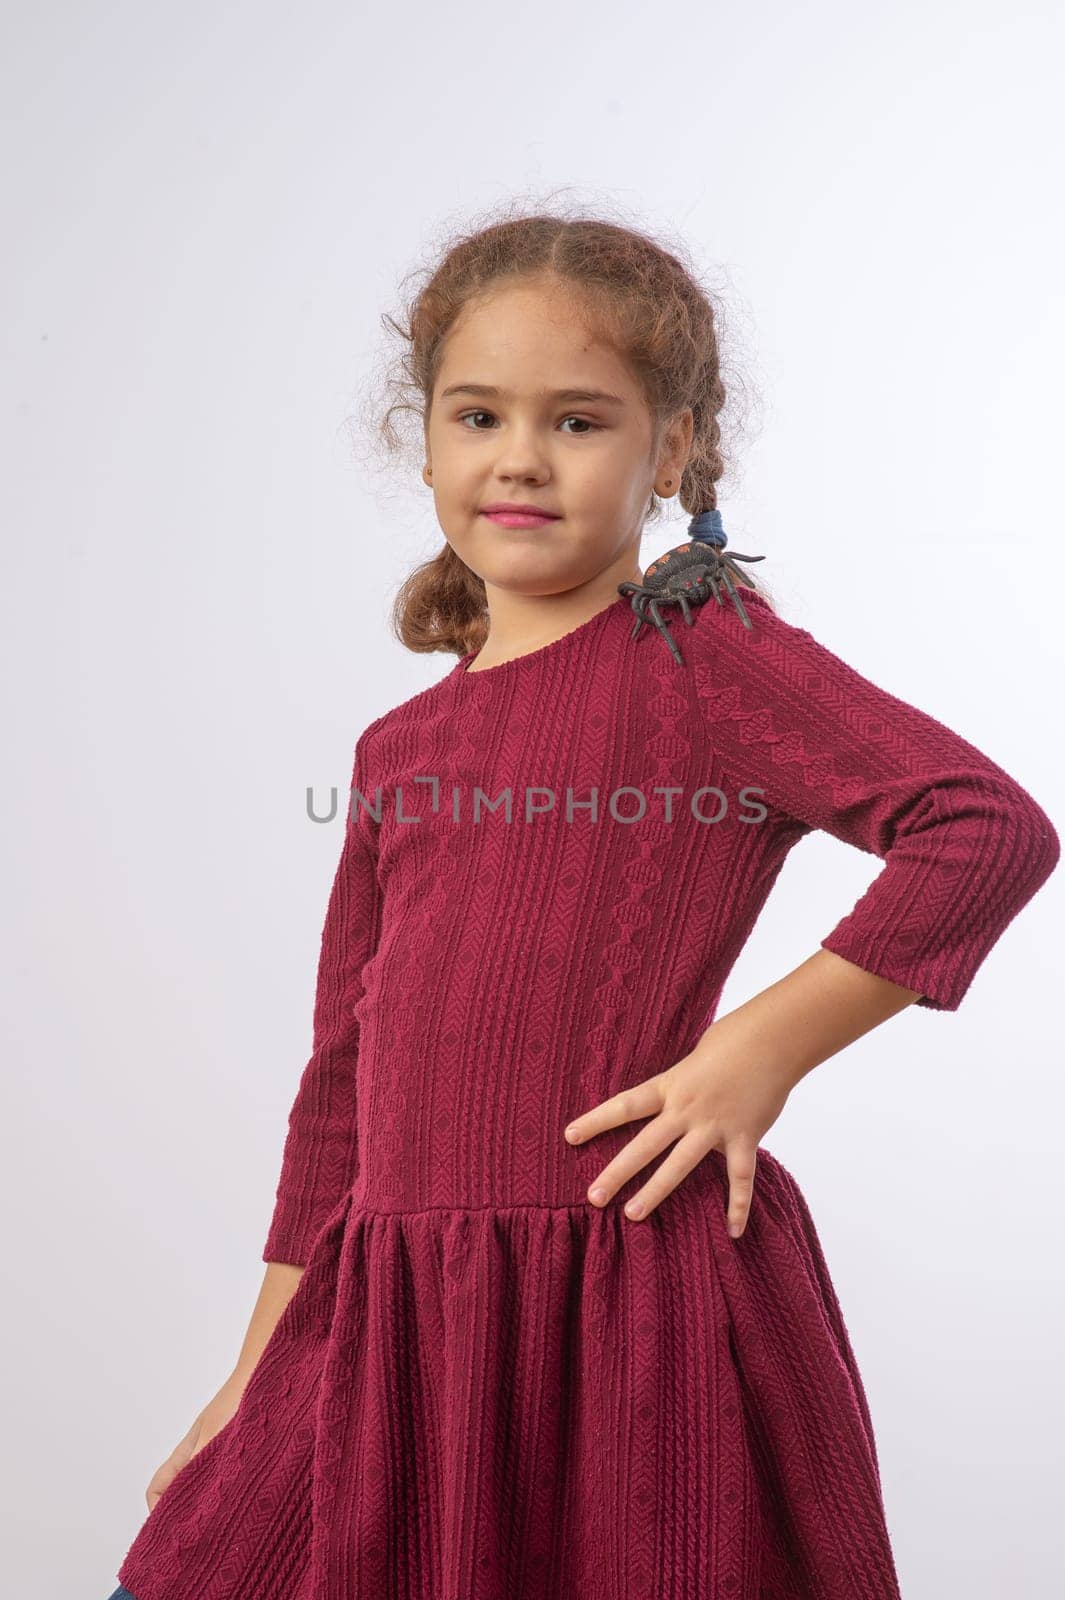 studio portrait of a charming little girl on a white background 14 by Mixa74